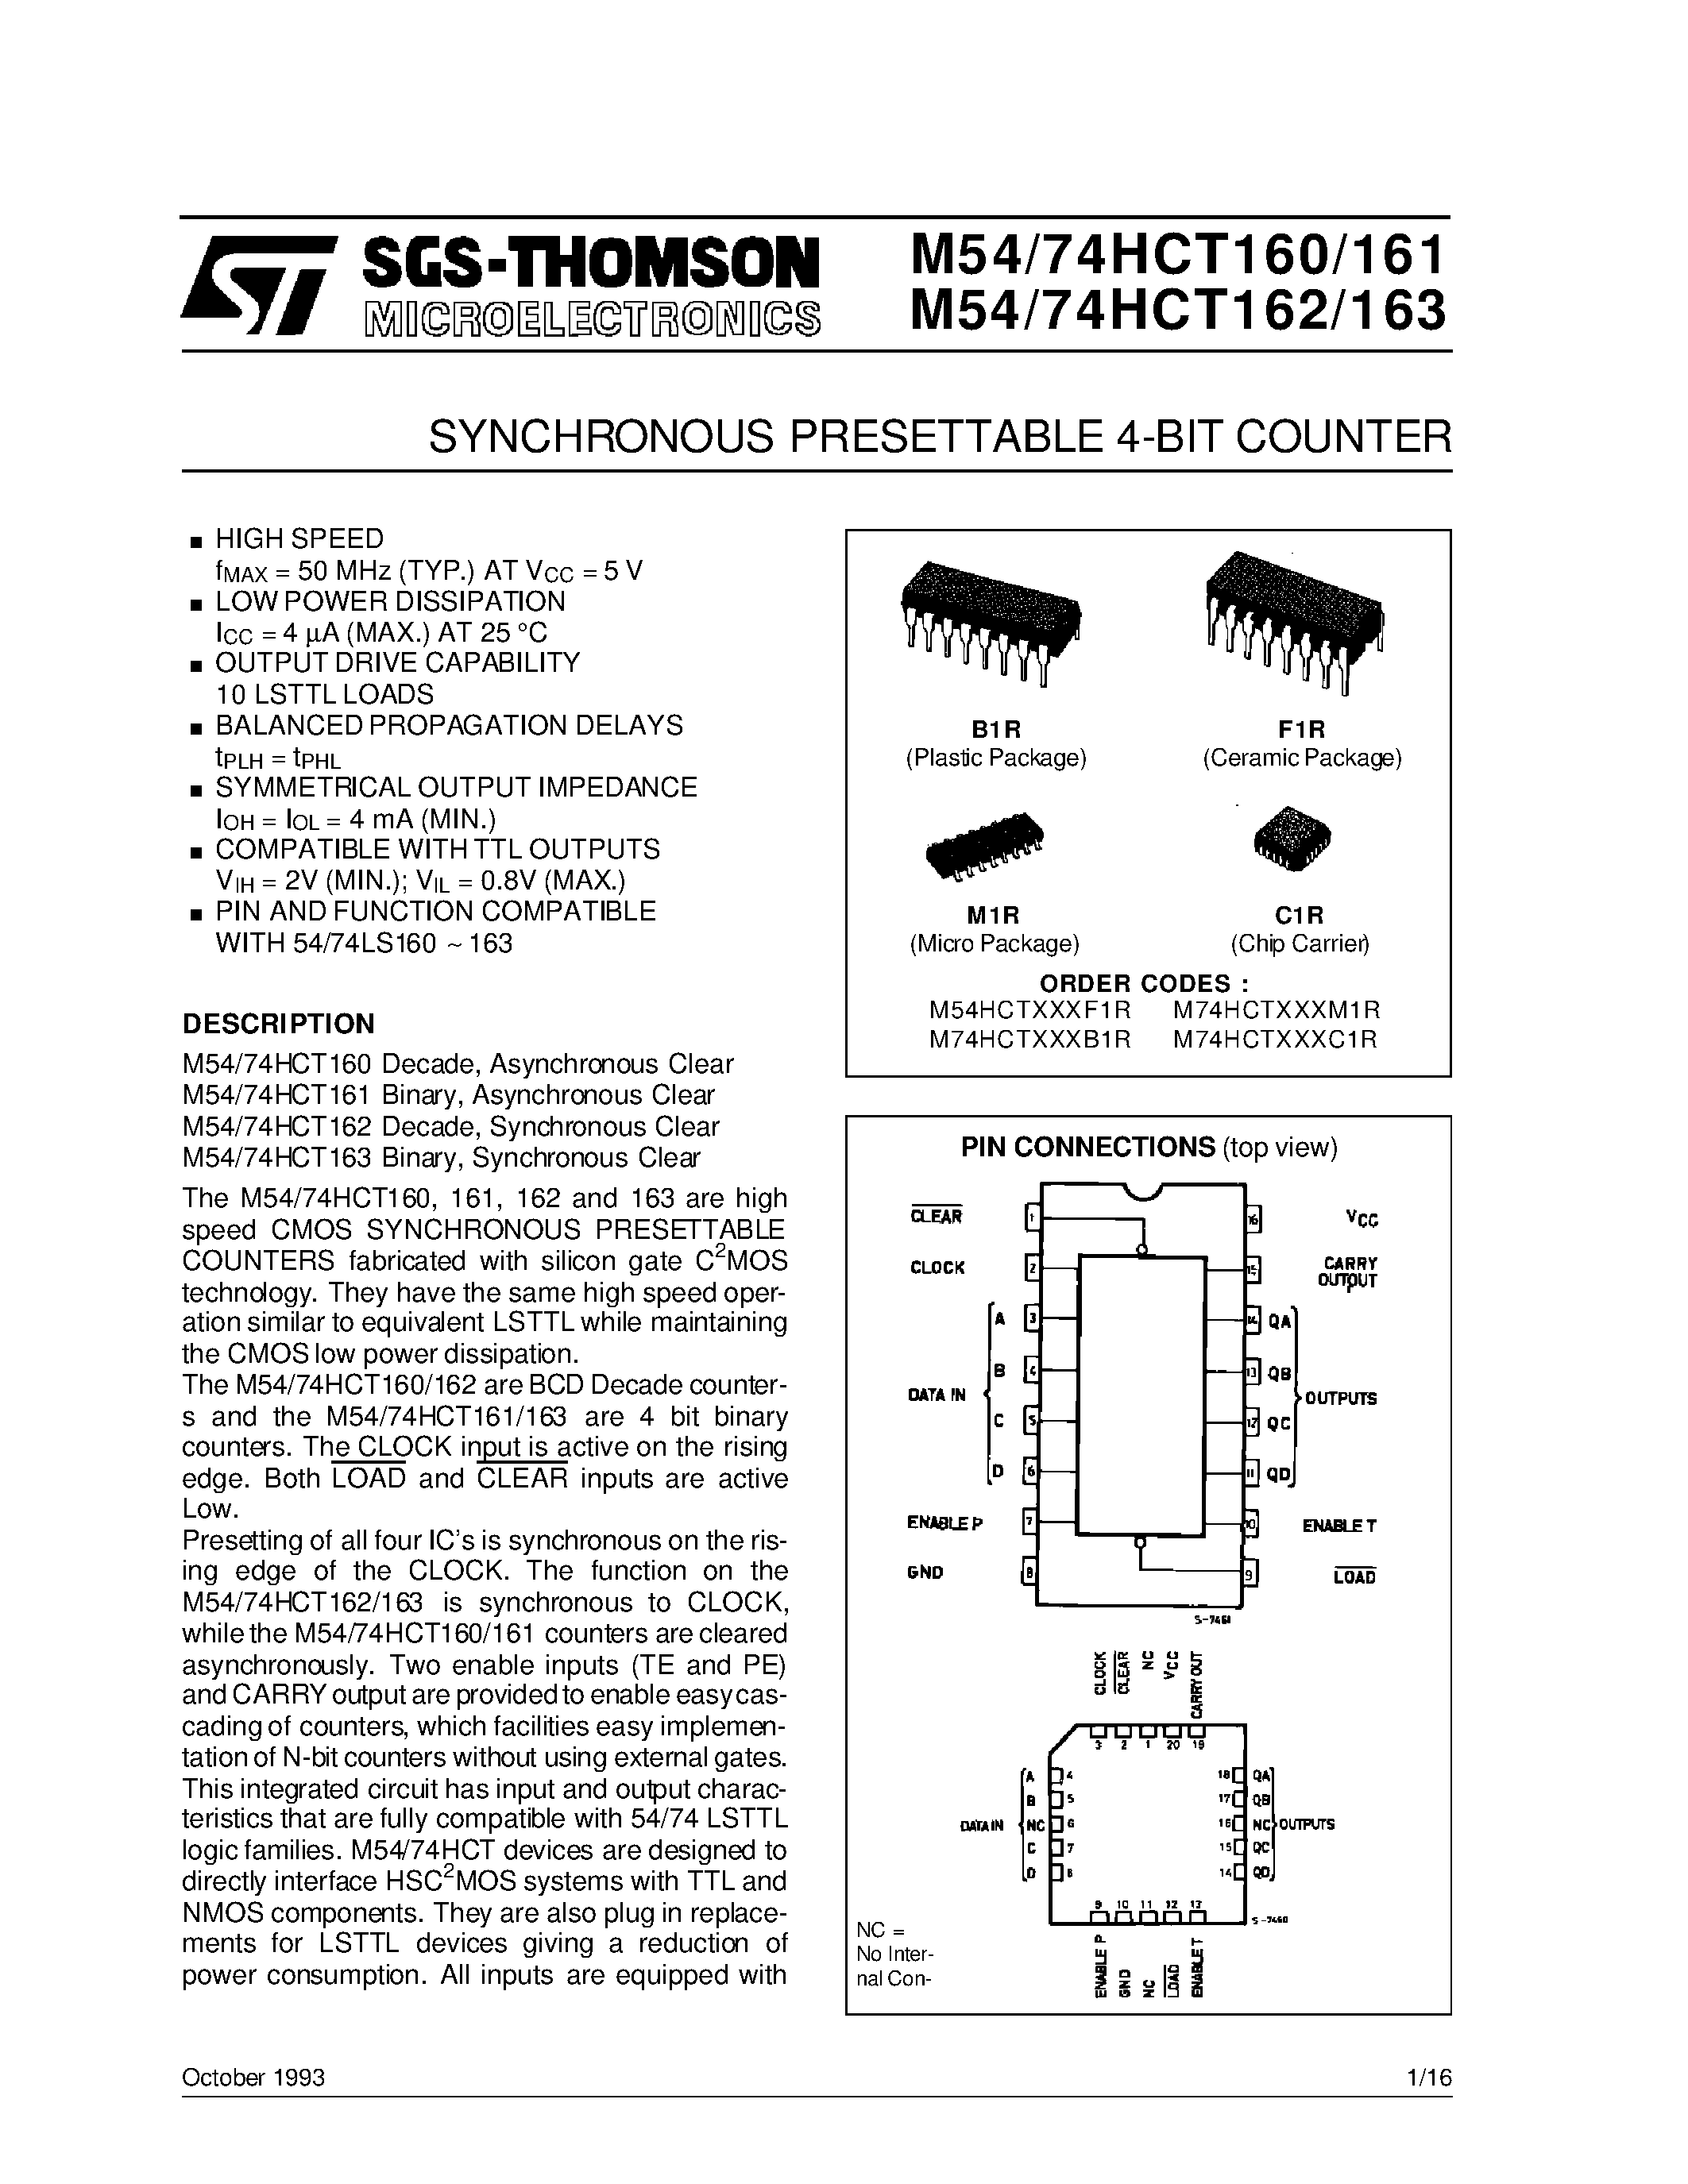 Datasheet M74HCT162 - SYNCHRONOUS PRESETTABLE 4-BIT COUNTER page 1